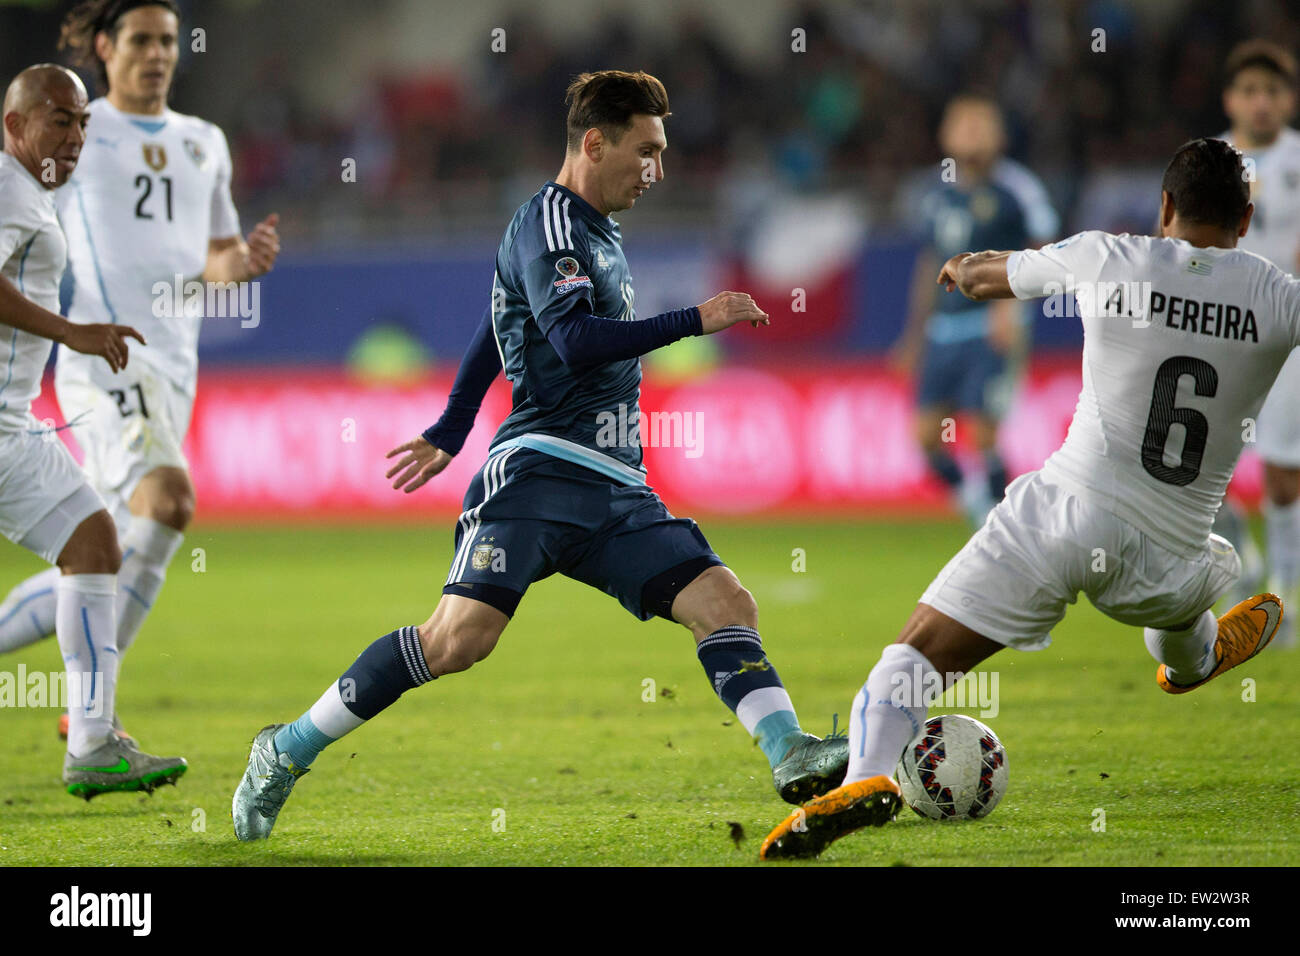 La Serena, Chile. 16th June, 2015. Lionel Messi (C) of Argentina vies for the ball with Alvaro Pereira of Uruguay during the Group B match at the 2015 American Cup, at La Portada stadium, in La Serena, Chile, on June 16, 2015. Argentina won 1-0. Credit:  Luis Echeverria/Xinhua/Alamy Live News Stock Photo